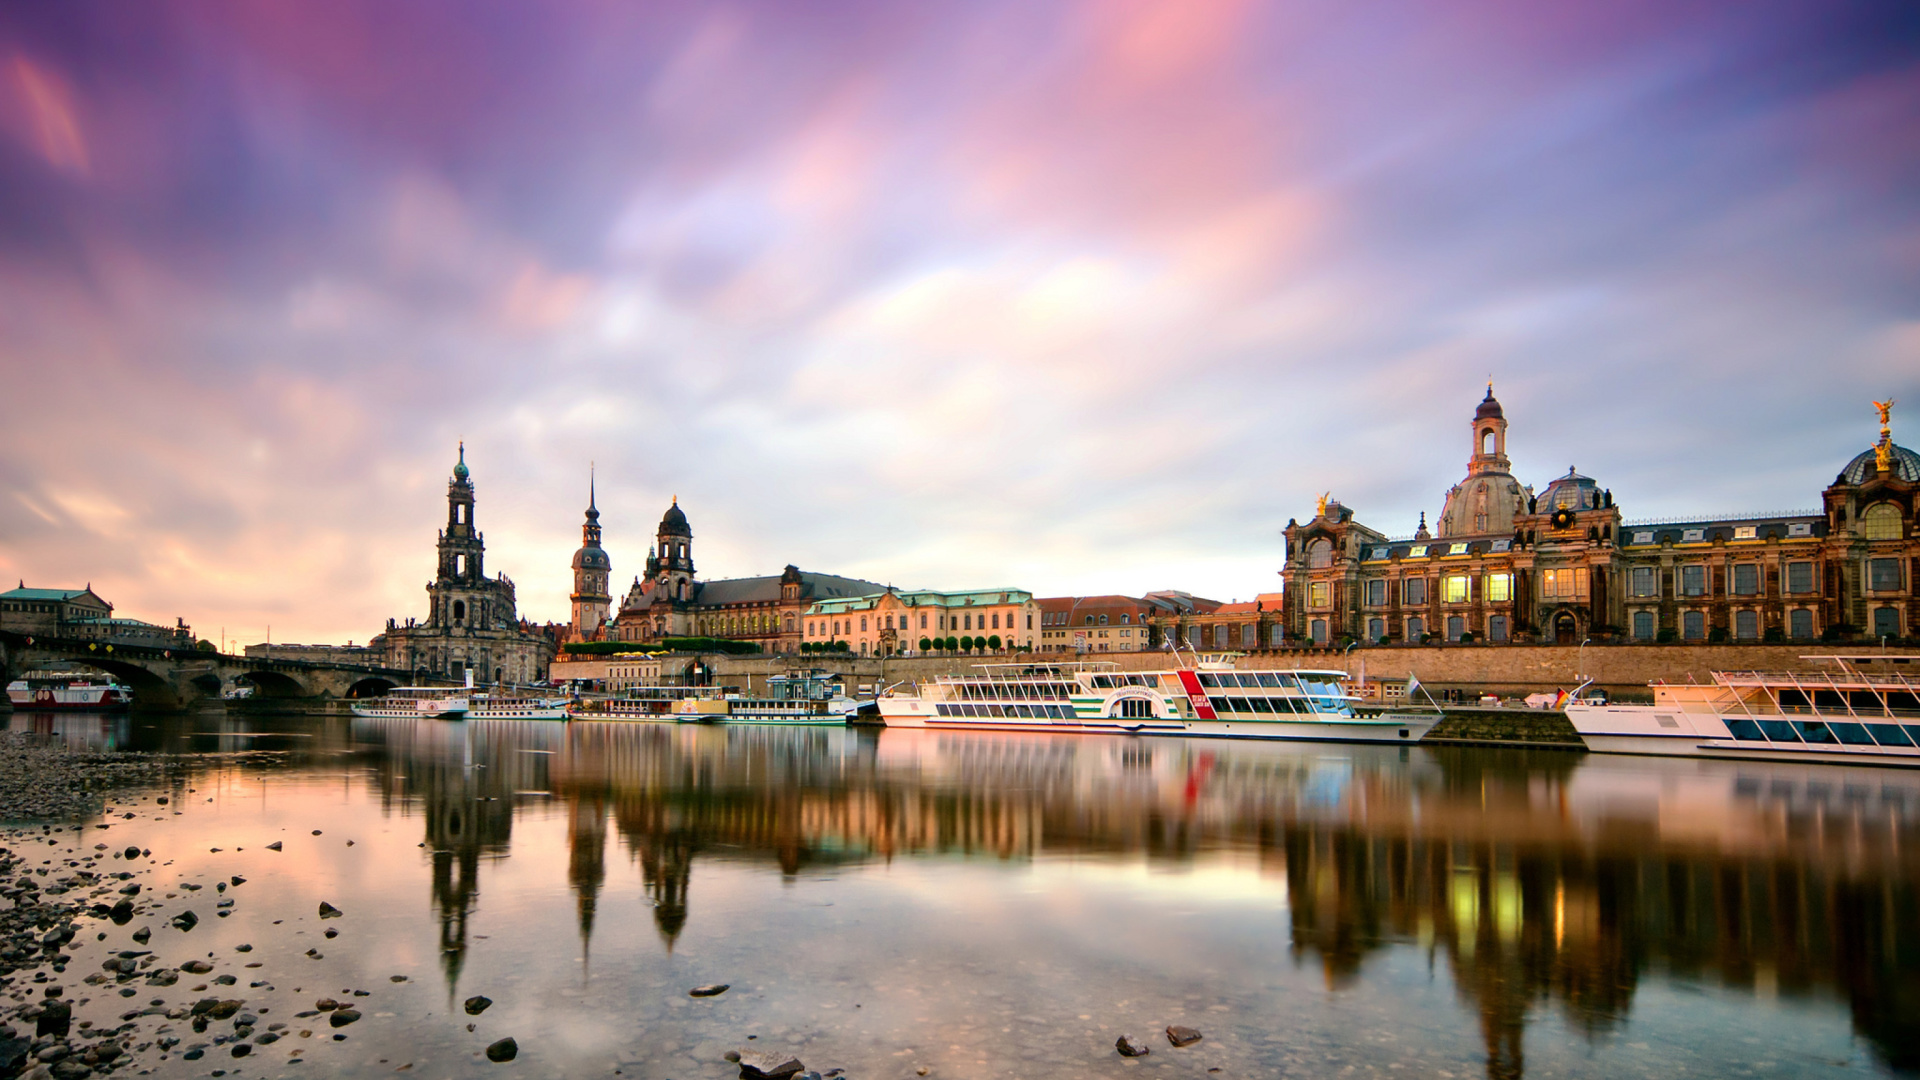 Dresden on Elbe River near Zwinger Palace wallpaper 1920x1080